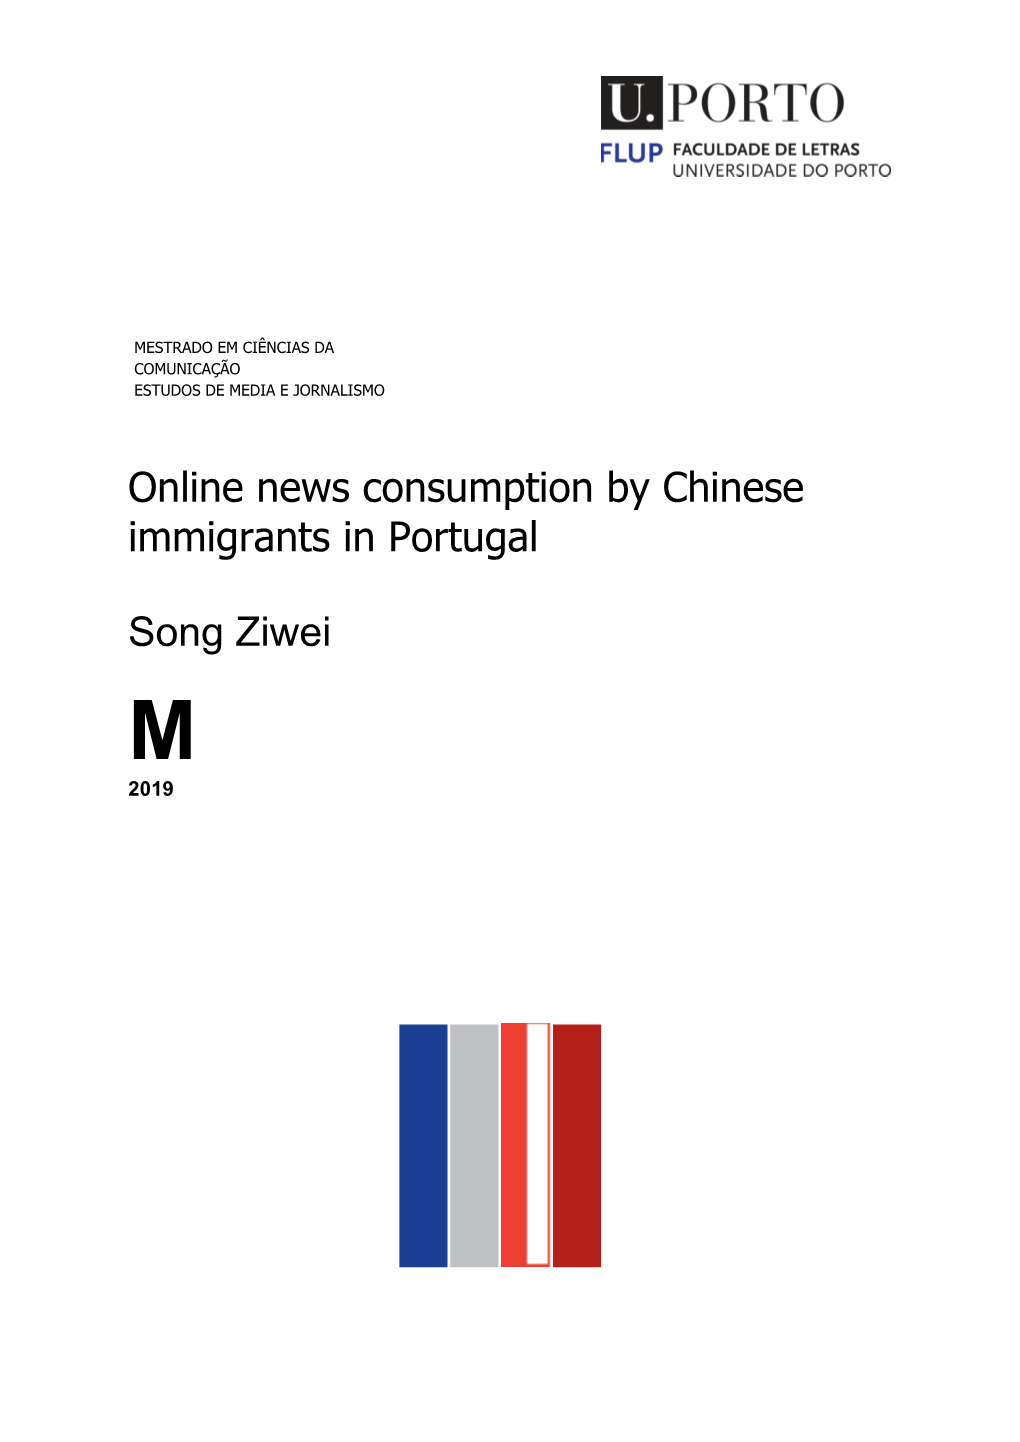 Online News Consumption by Chinese Immigrants in Portugal Song Ziwei